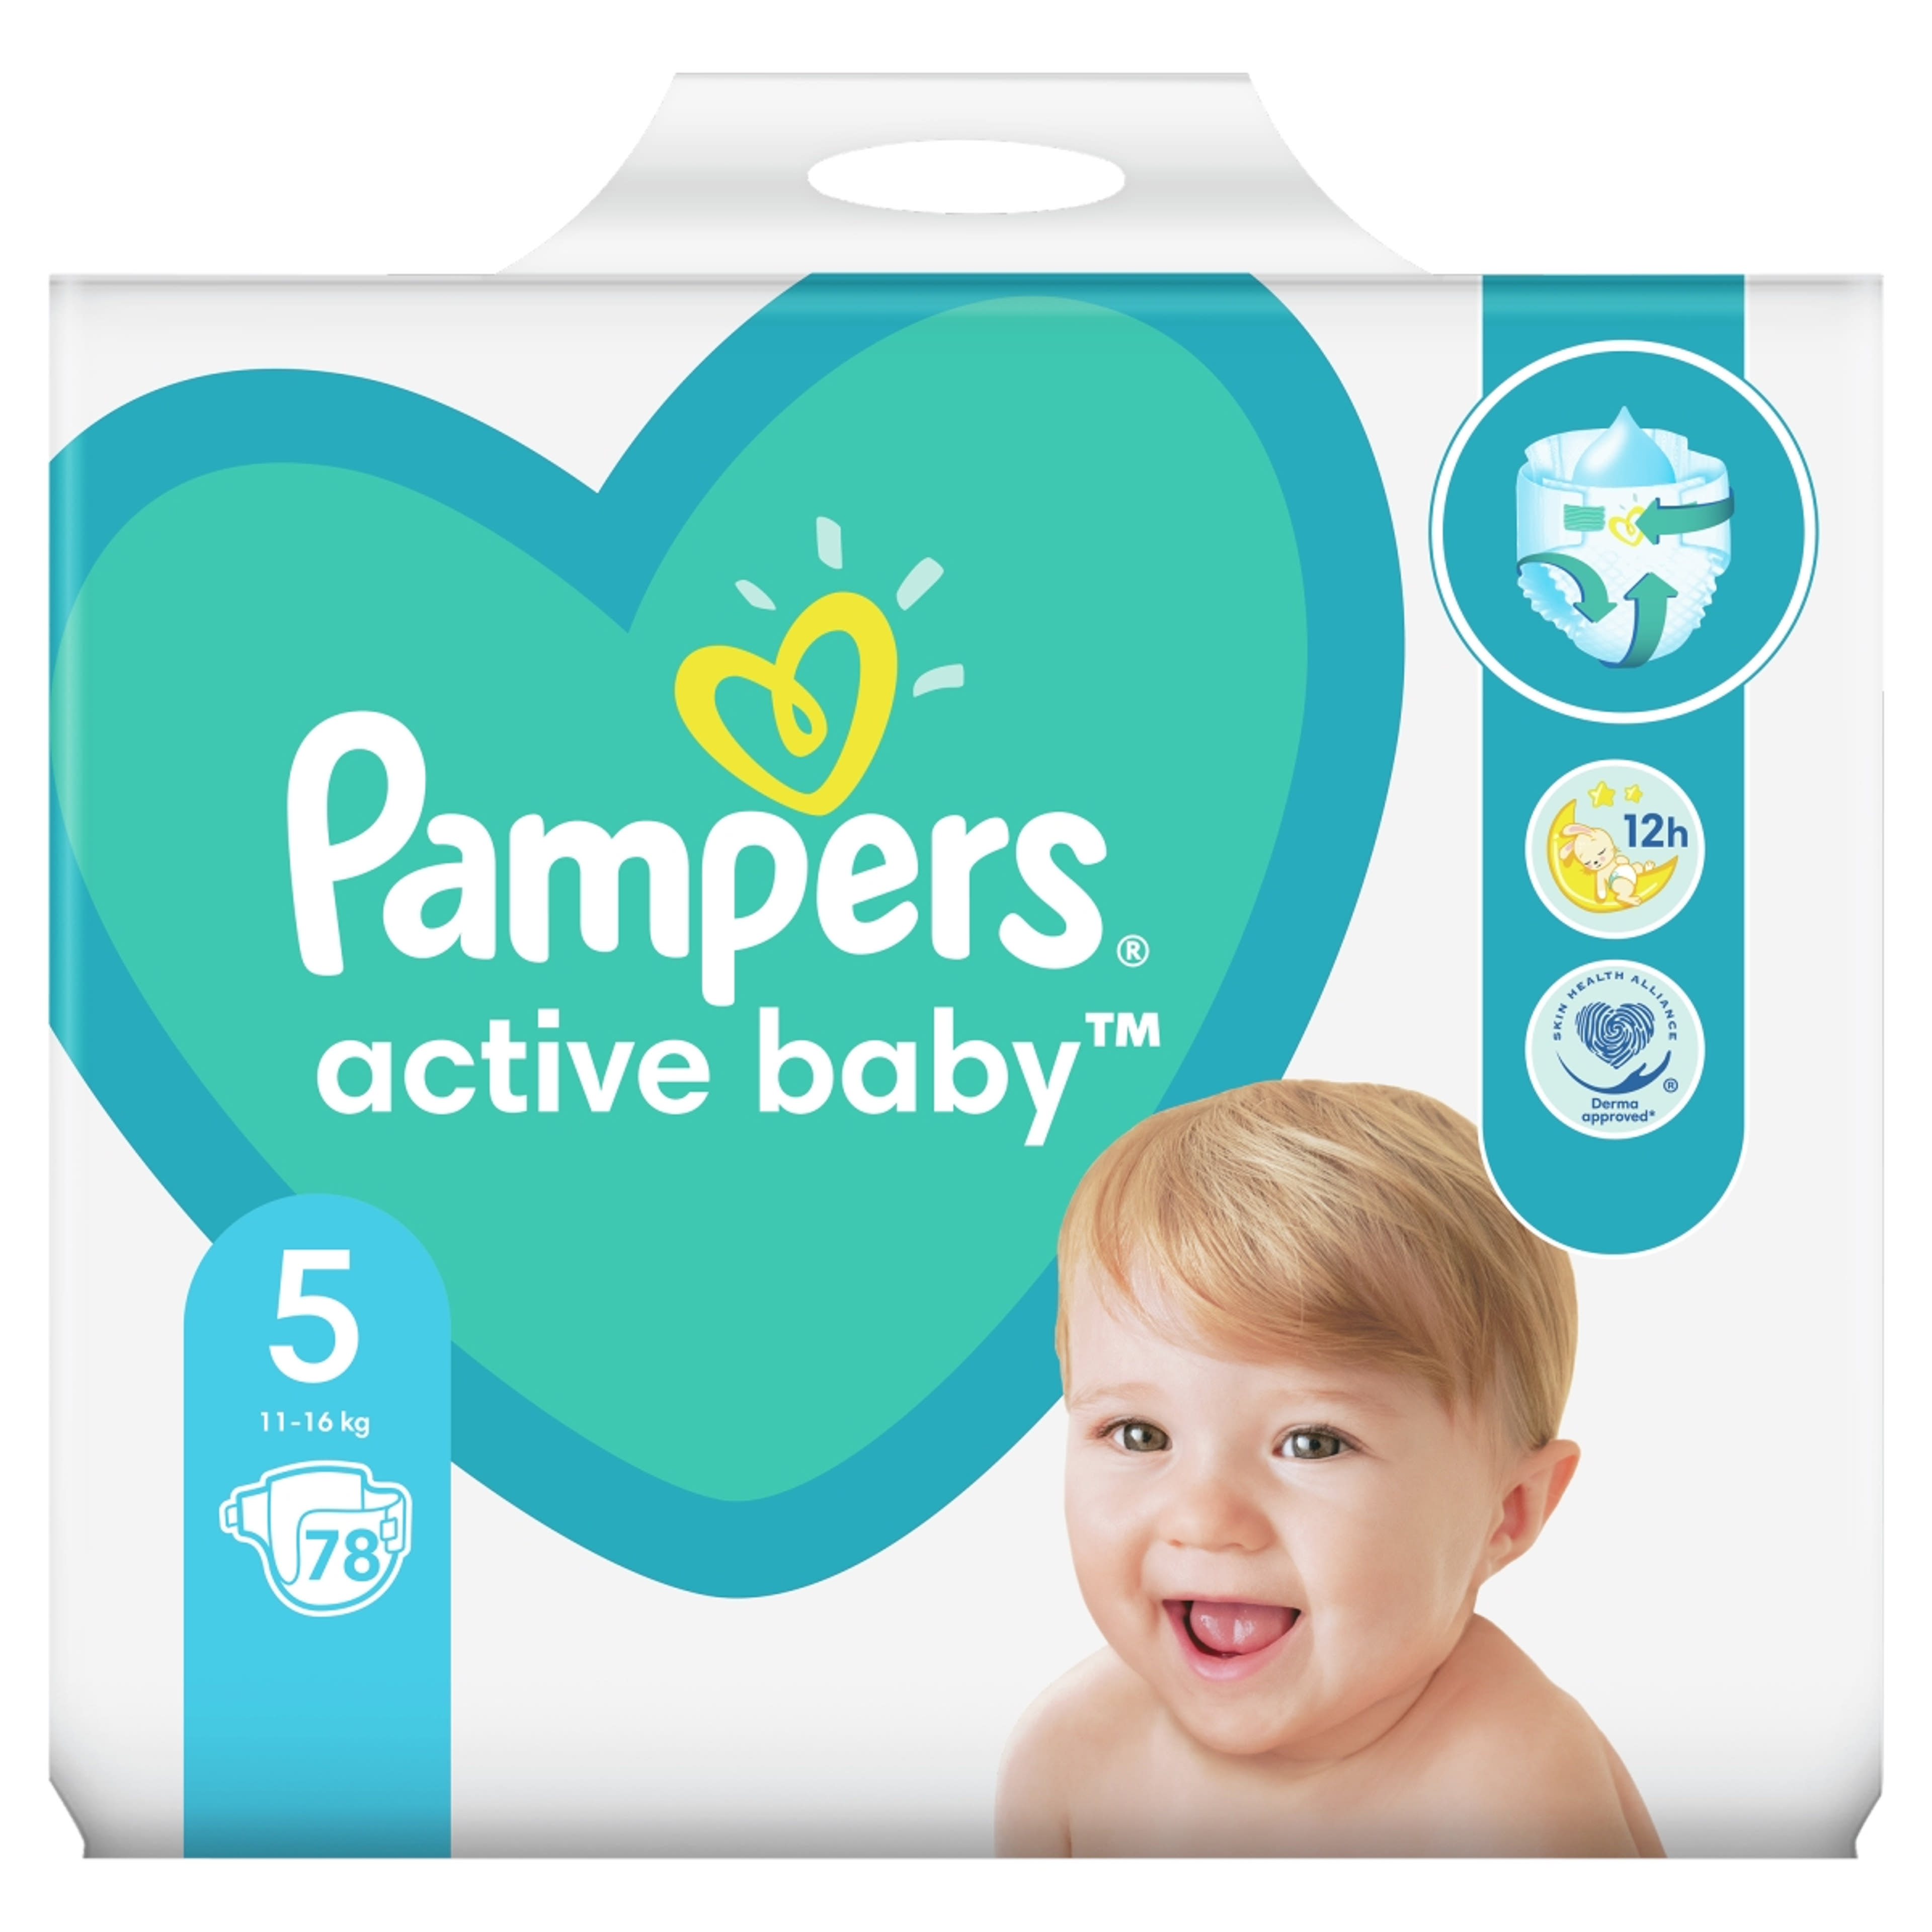 Pampers Giant Pack+ 5-os 11-16kg - 78 db